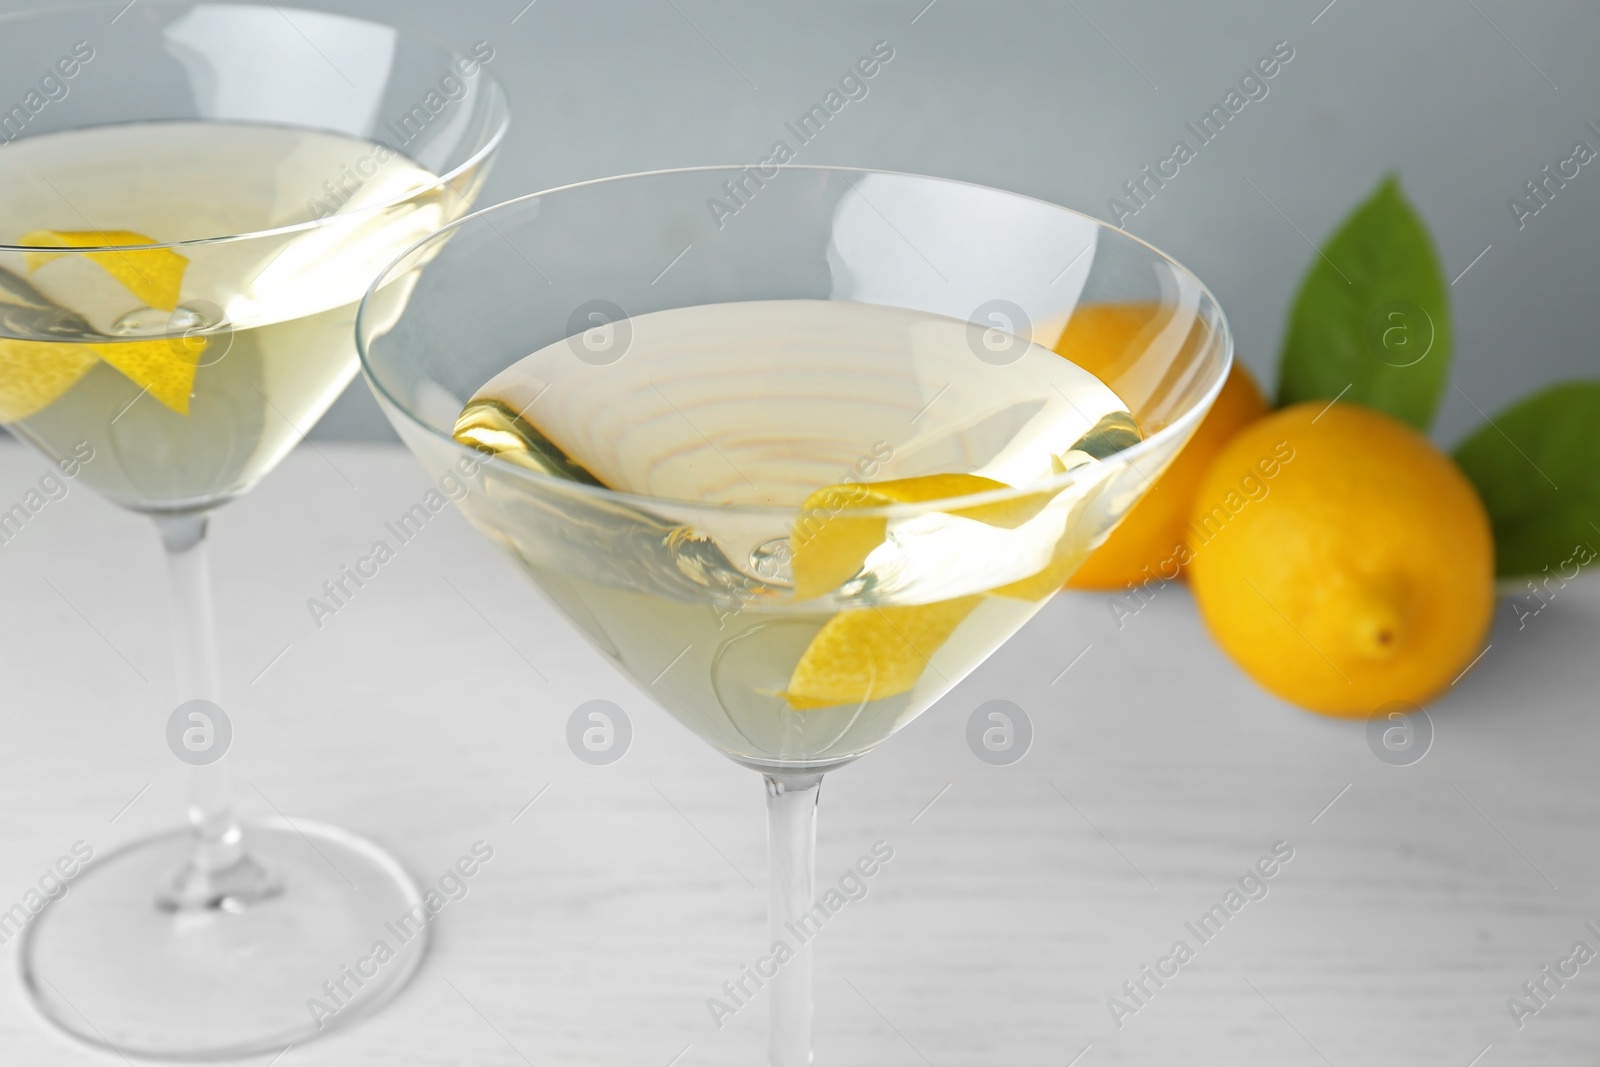 Photo of Glasses of lemon drop martini cocktail with zest on white wooden table against grey background